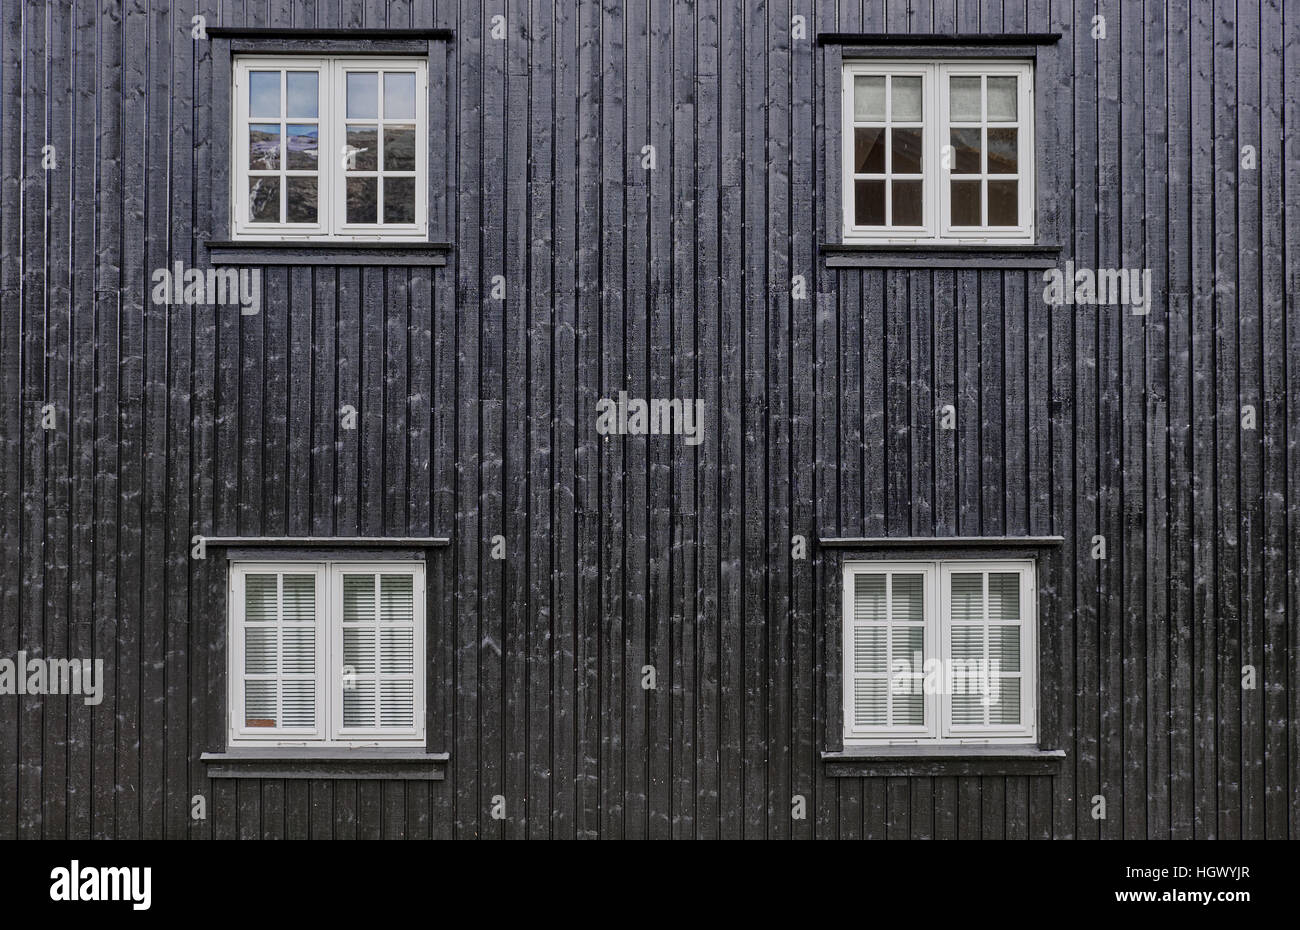 Four square white casement windows with mullions, placed symmetrically in a black painted facade with boards fitted as tongue and groove Stock Photo